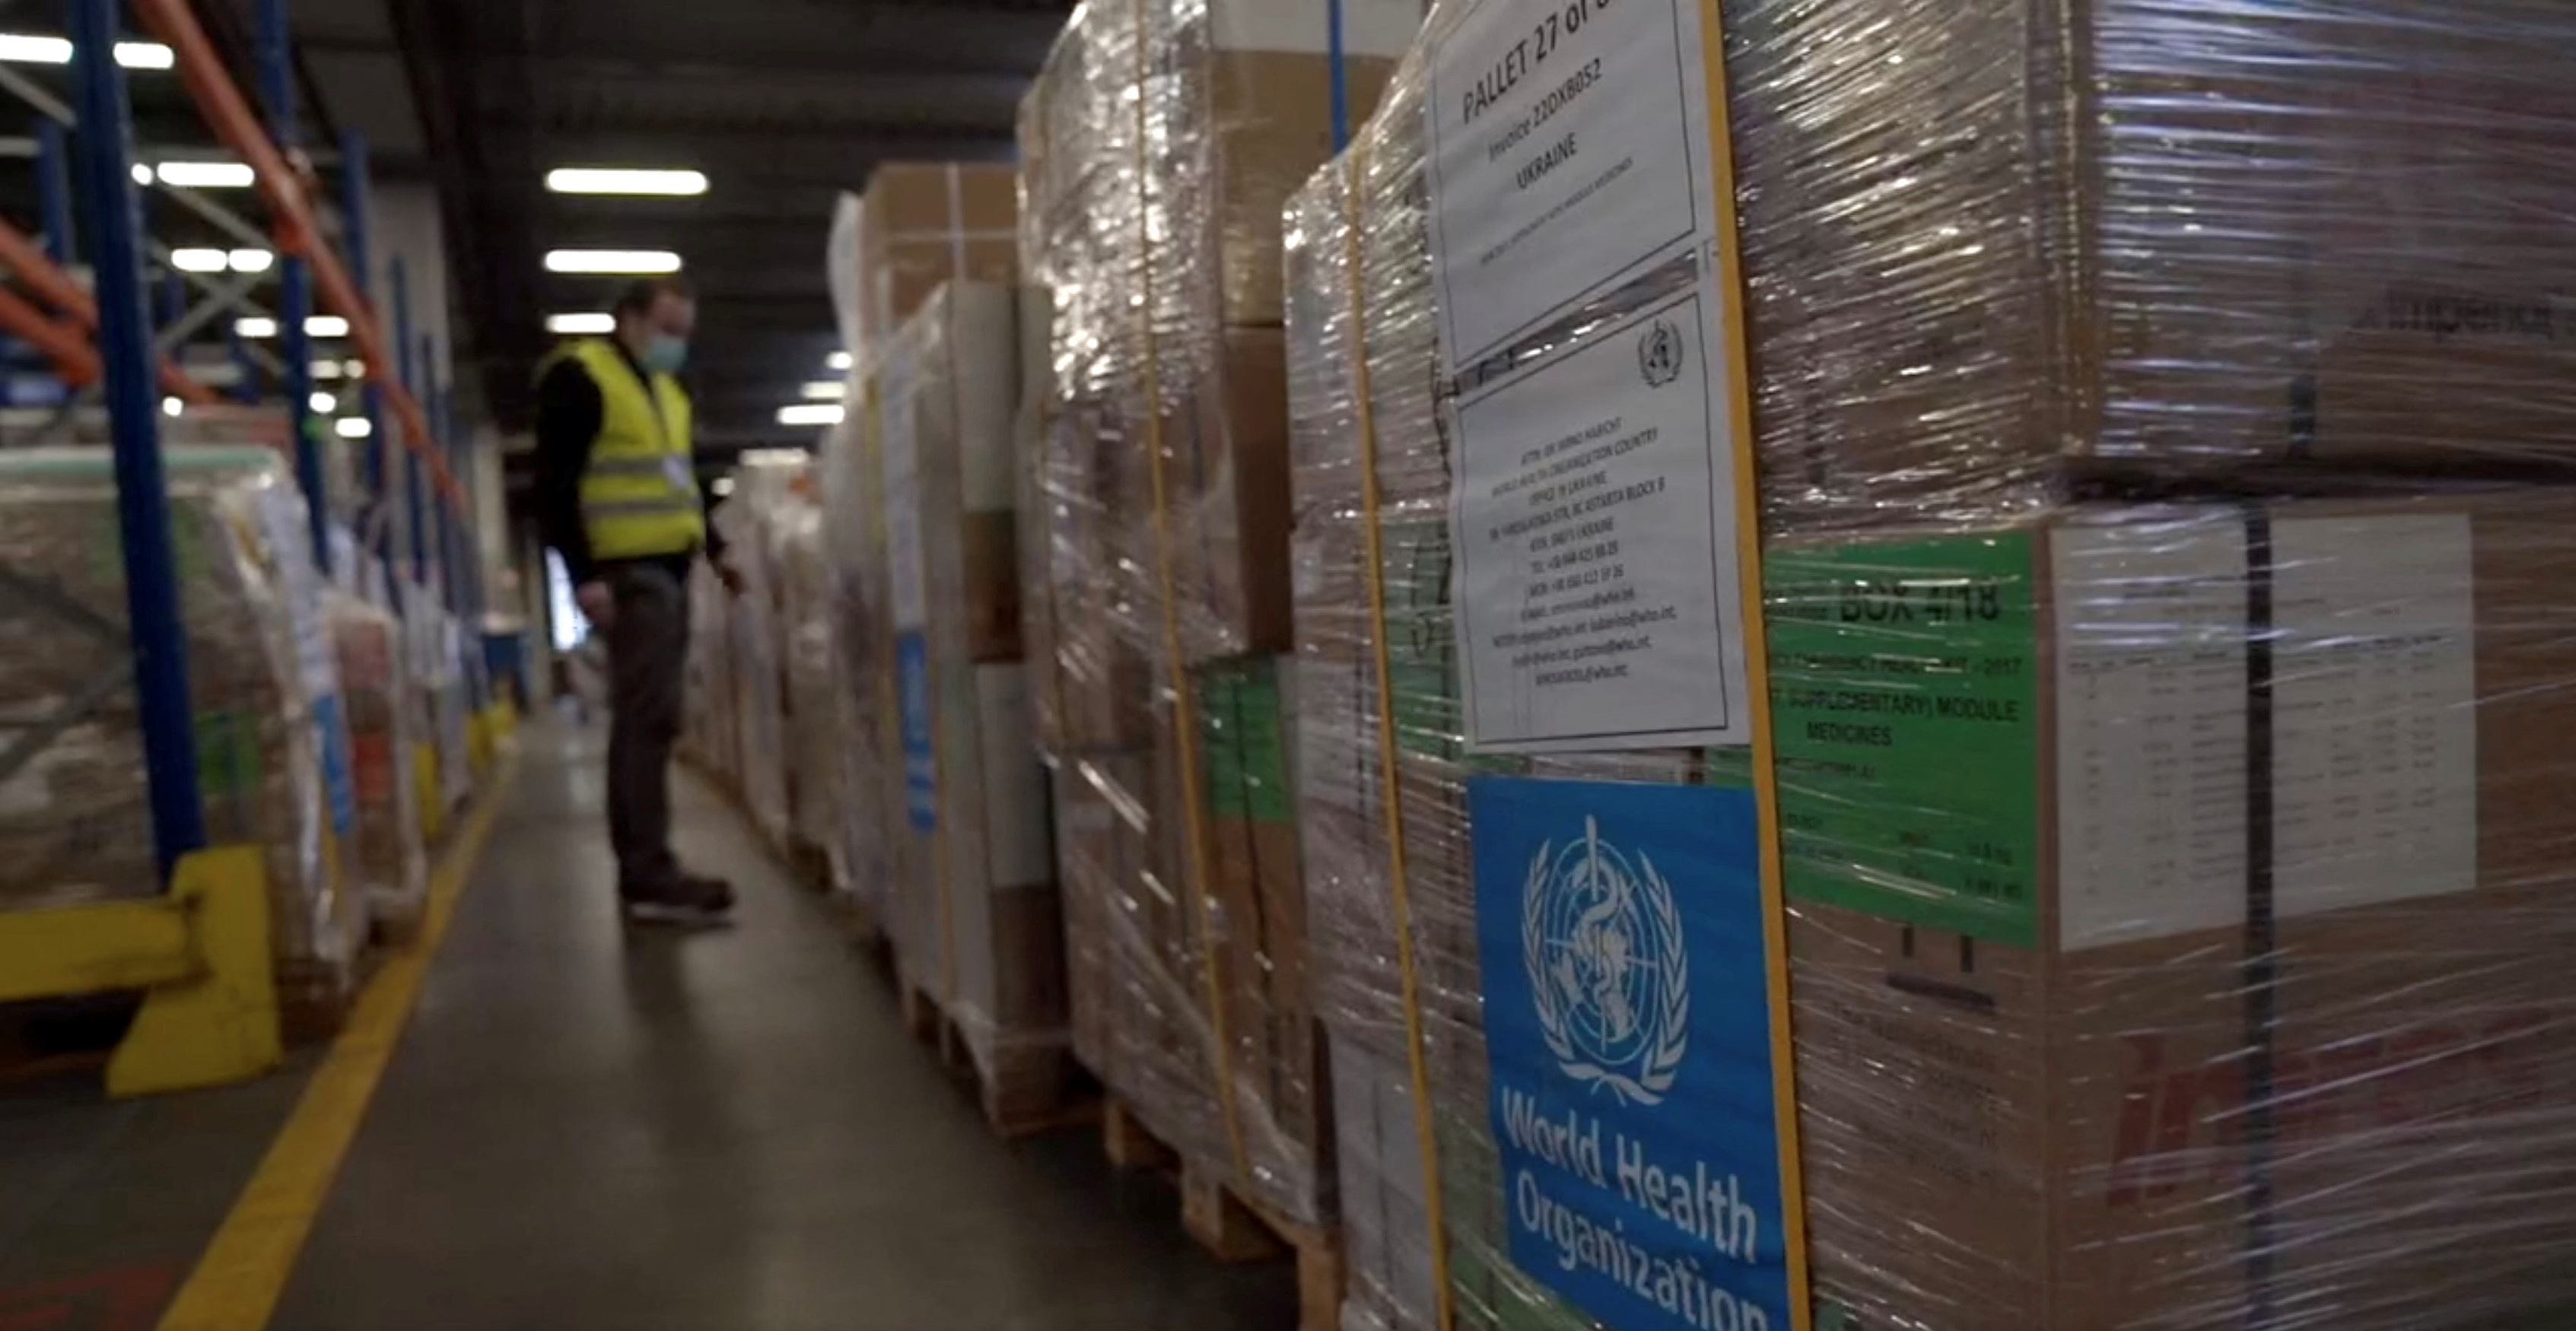 WHO medical aid for Ukraine arrives in Warsaw